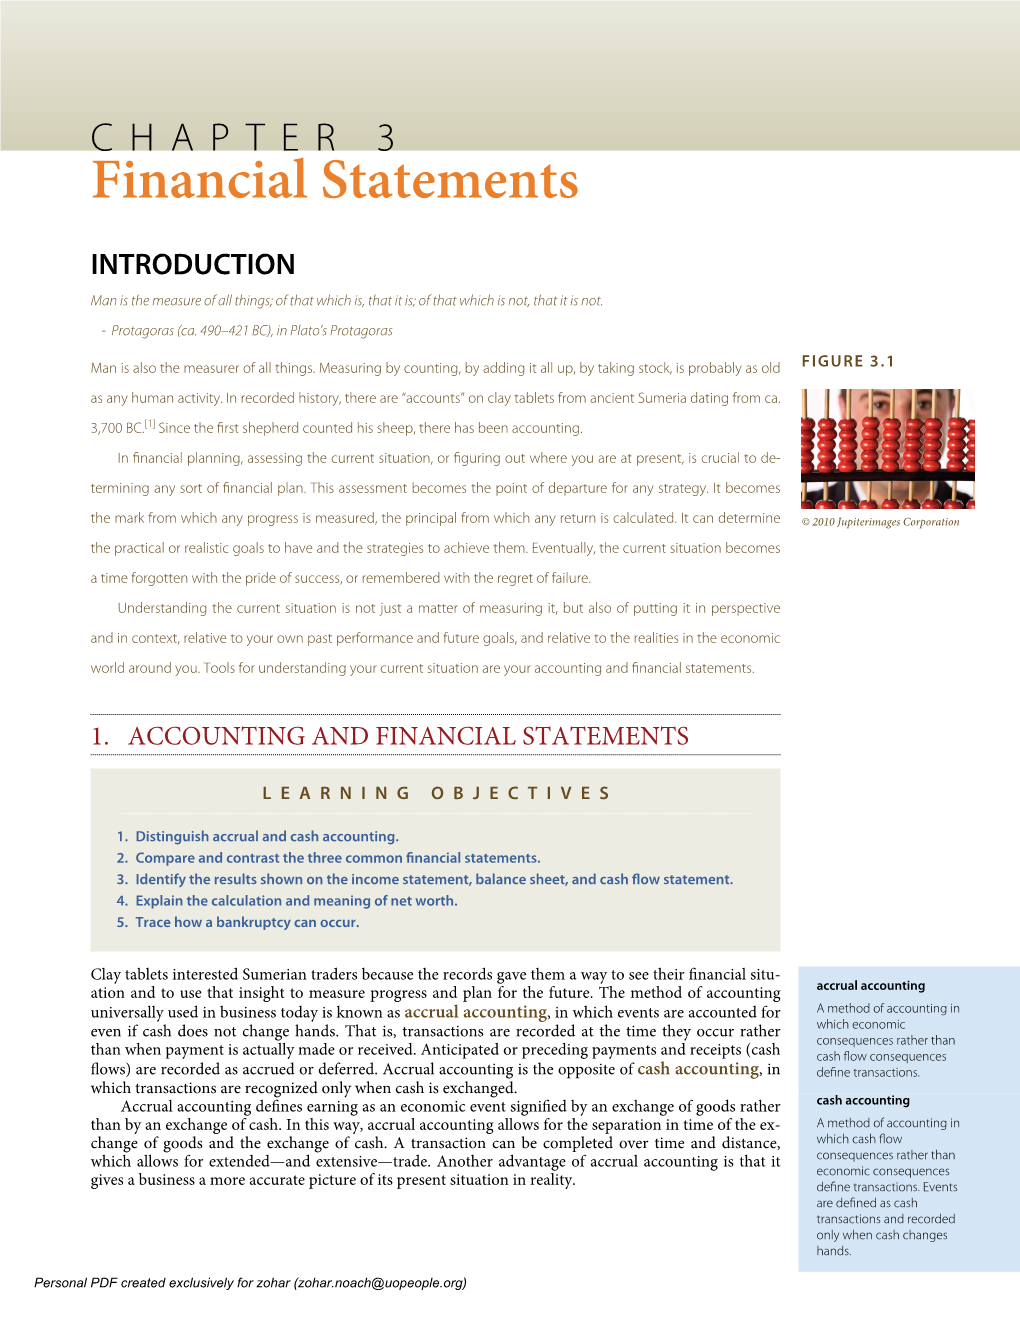 CHAPTER 3 Financial Statements